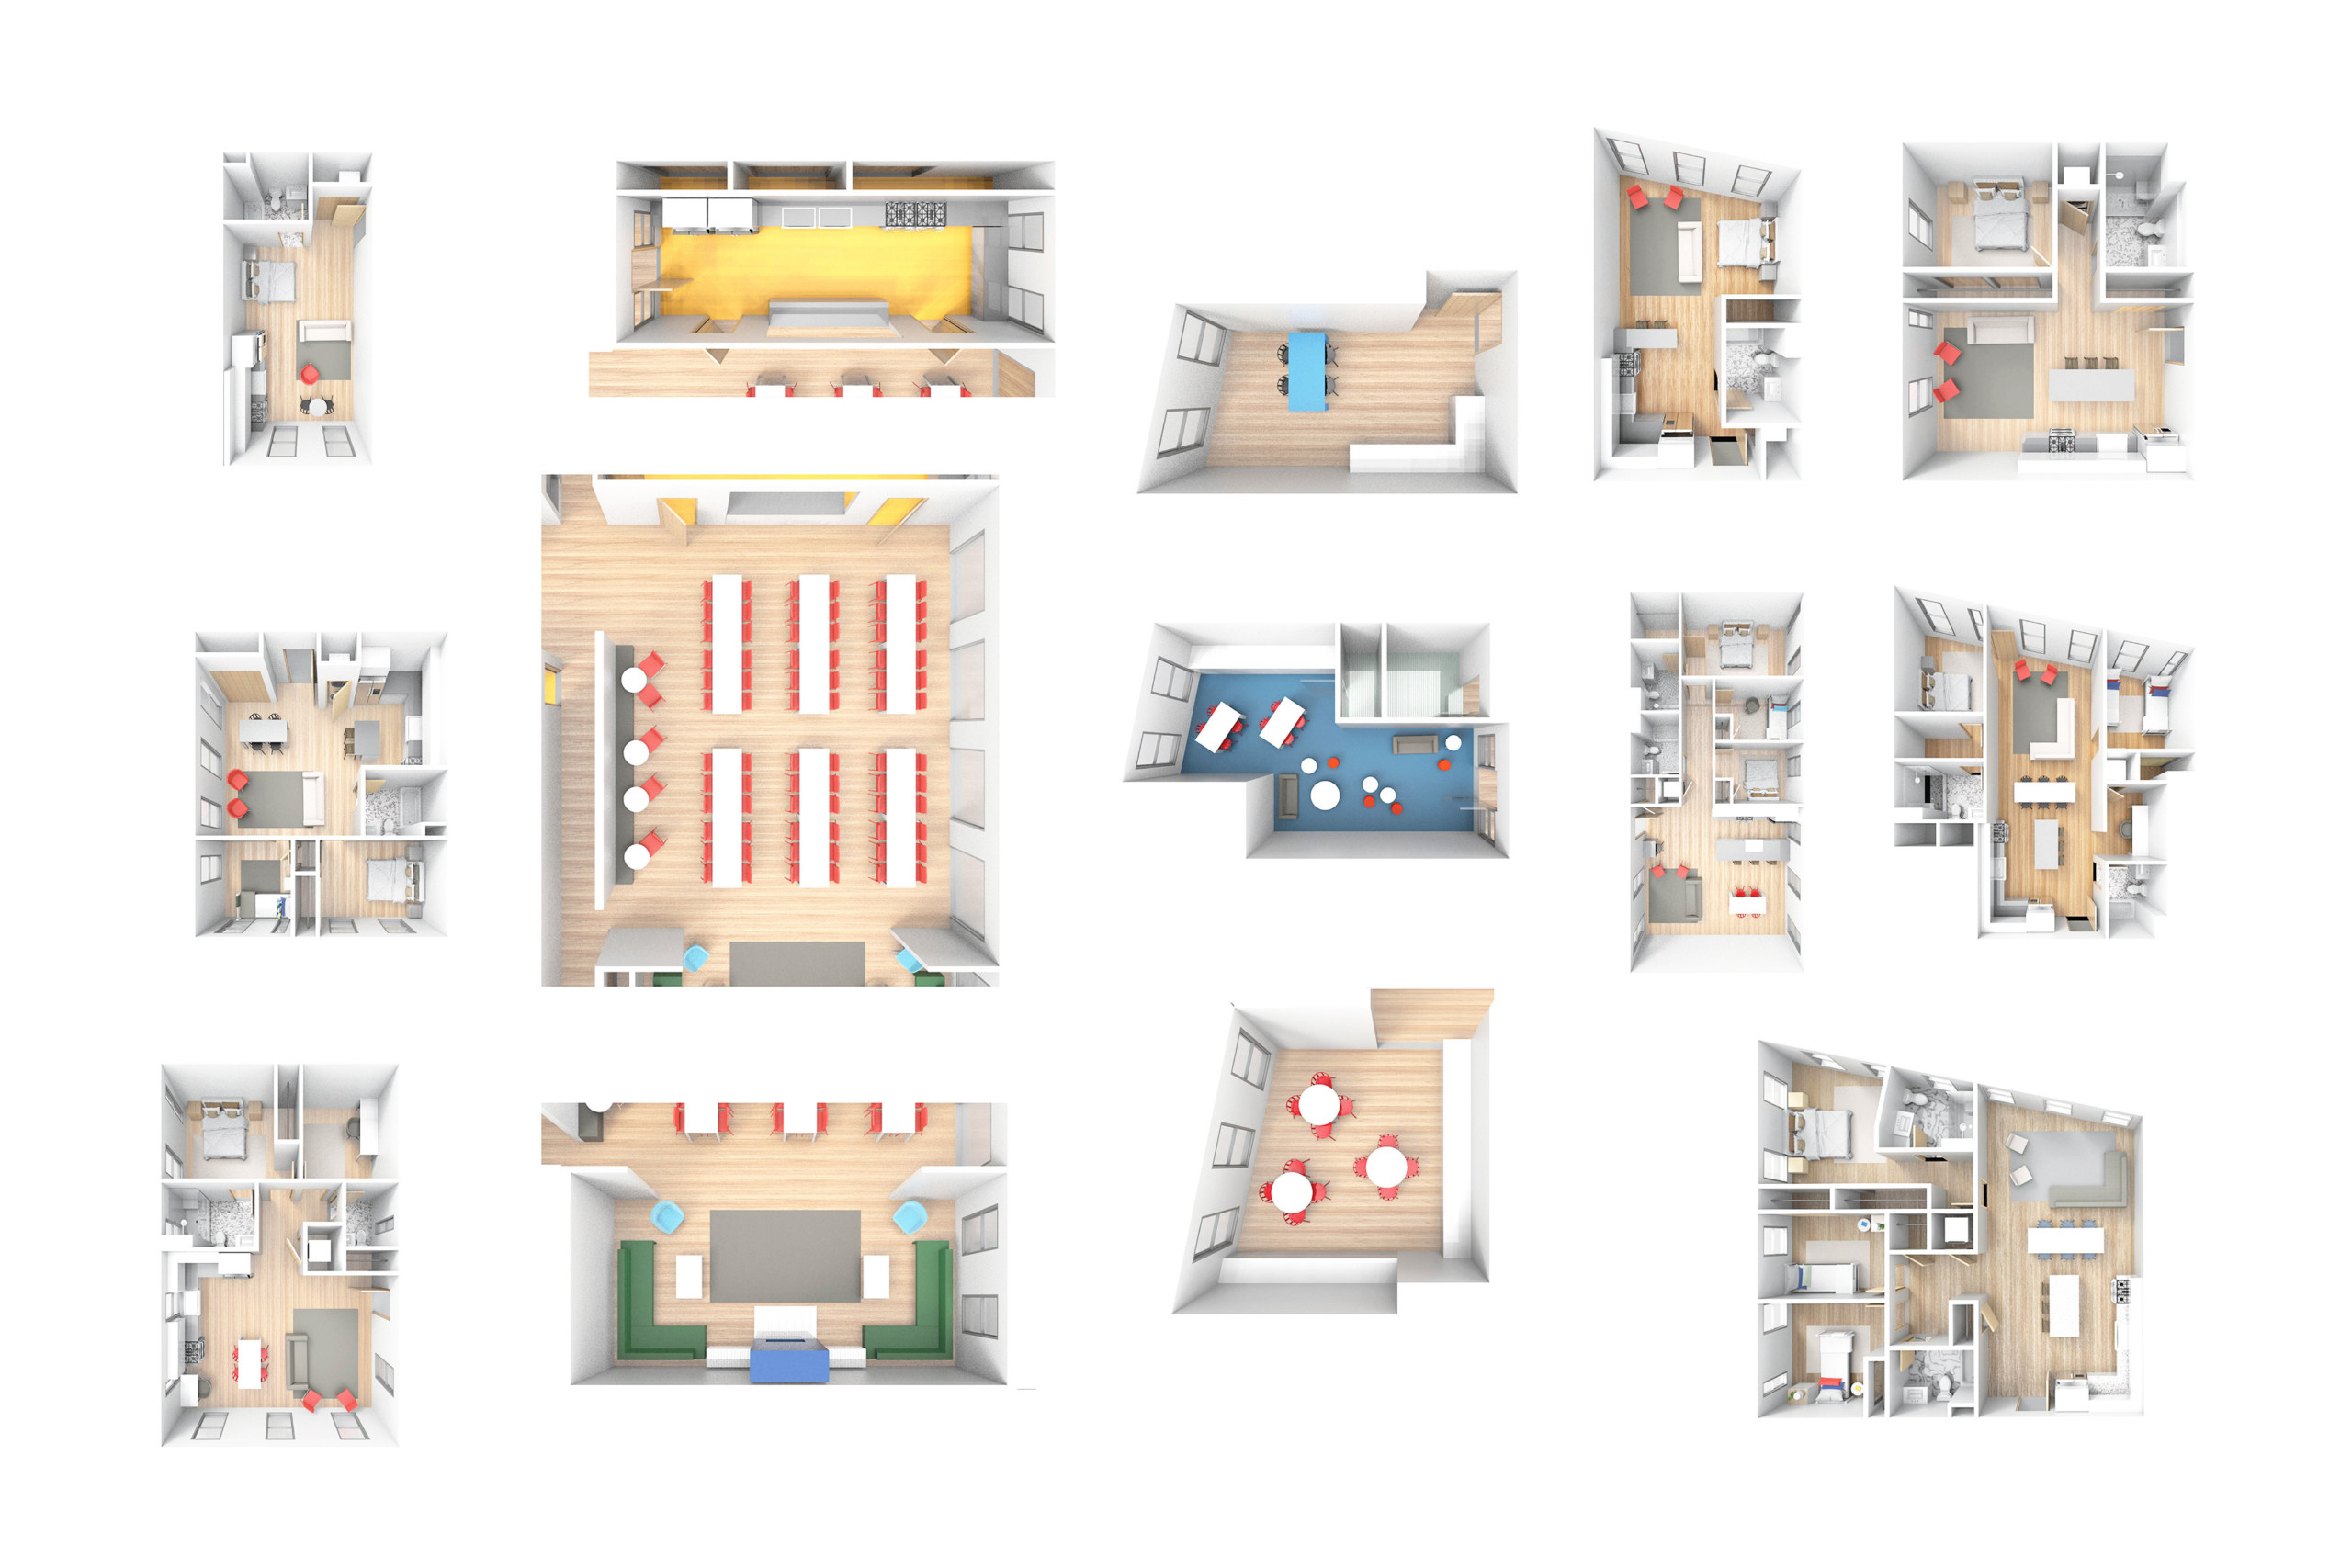 Rendered rooms from a top down view arranged into rows. Each room accommodates a different type of co-living, from dining halls to lounge spaces and more